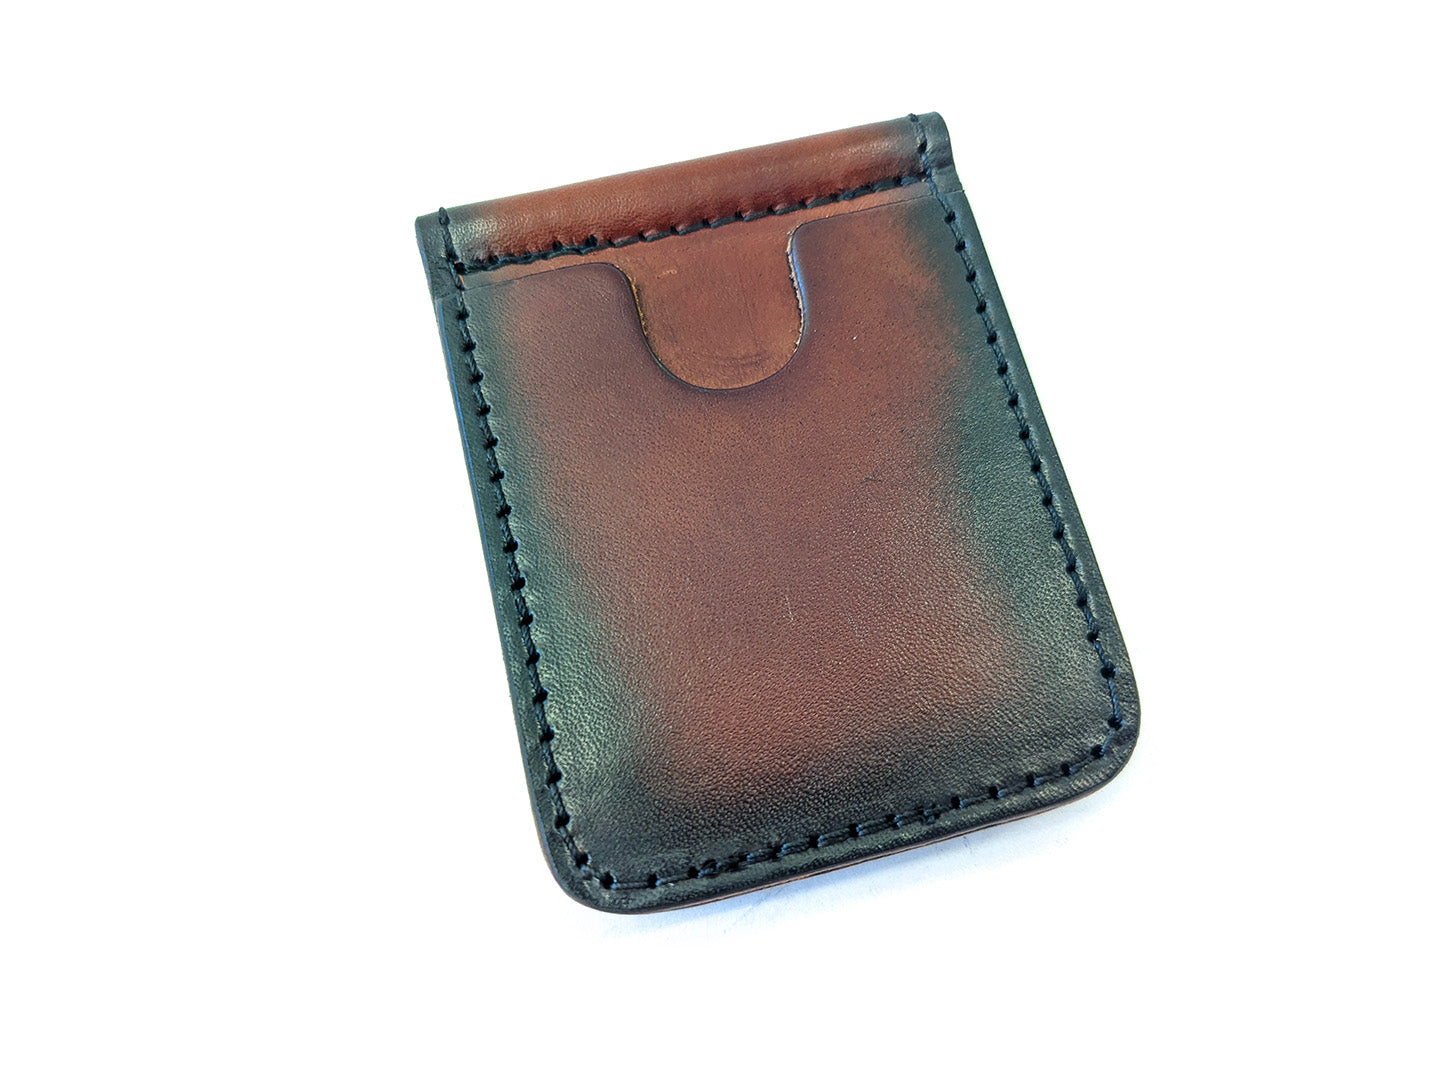 Anvil Customs Premium Handmade Leather Wallets and Accessories